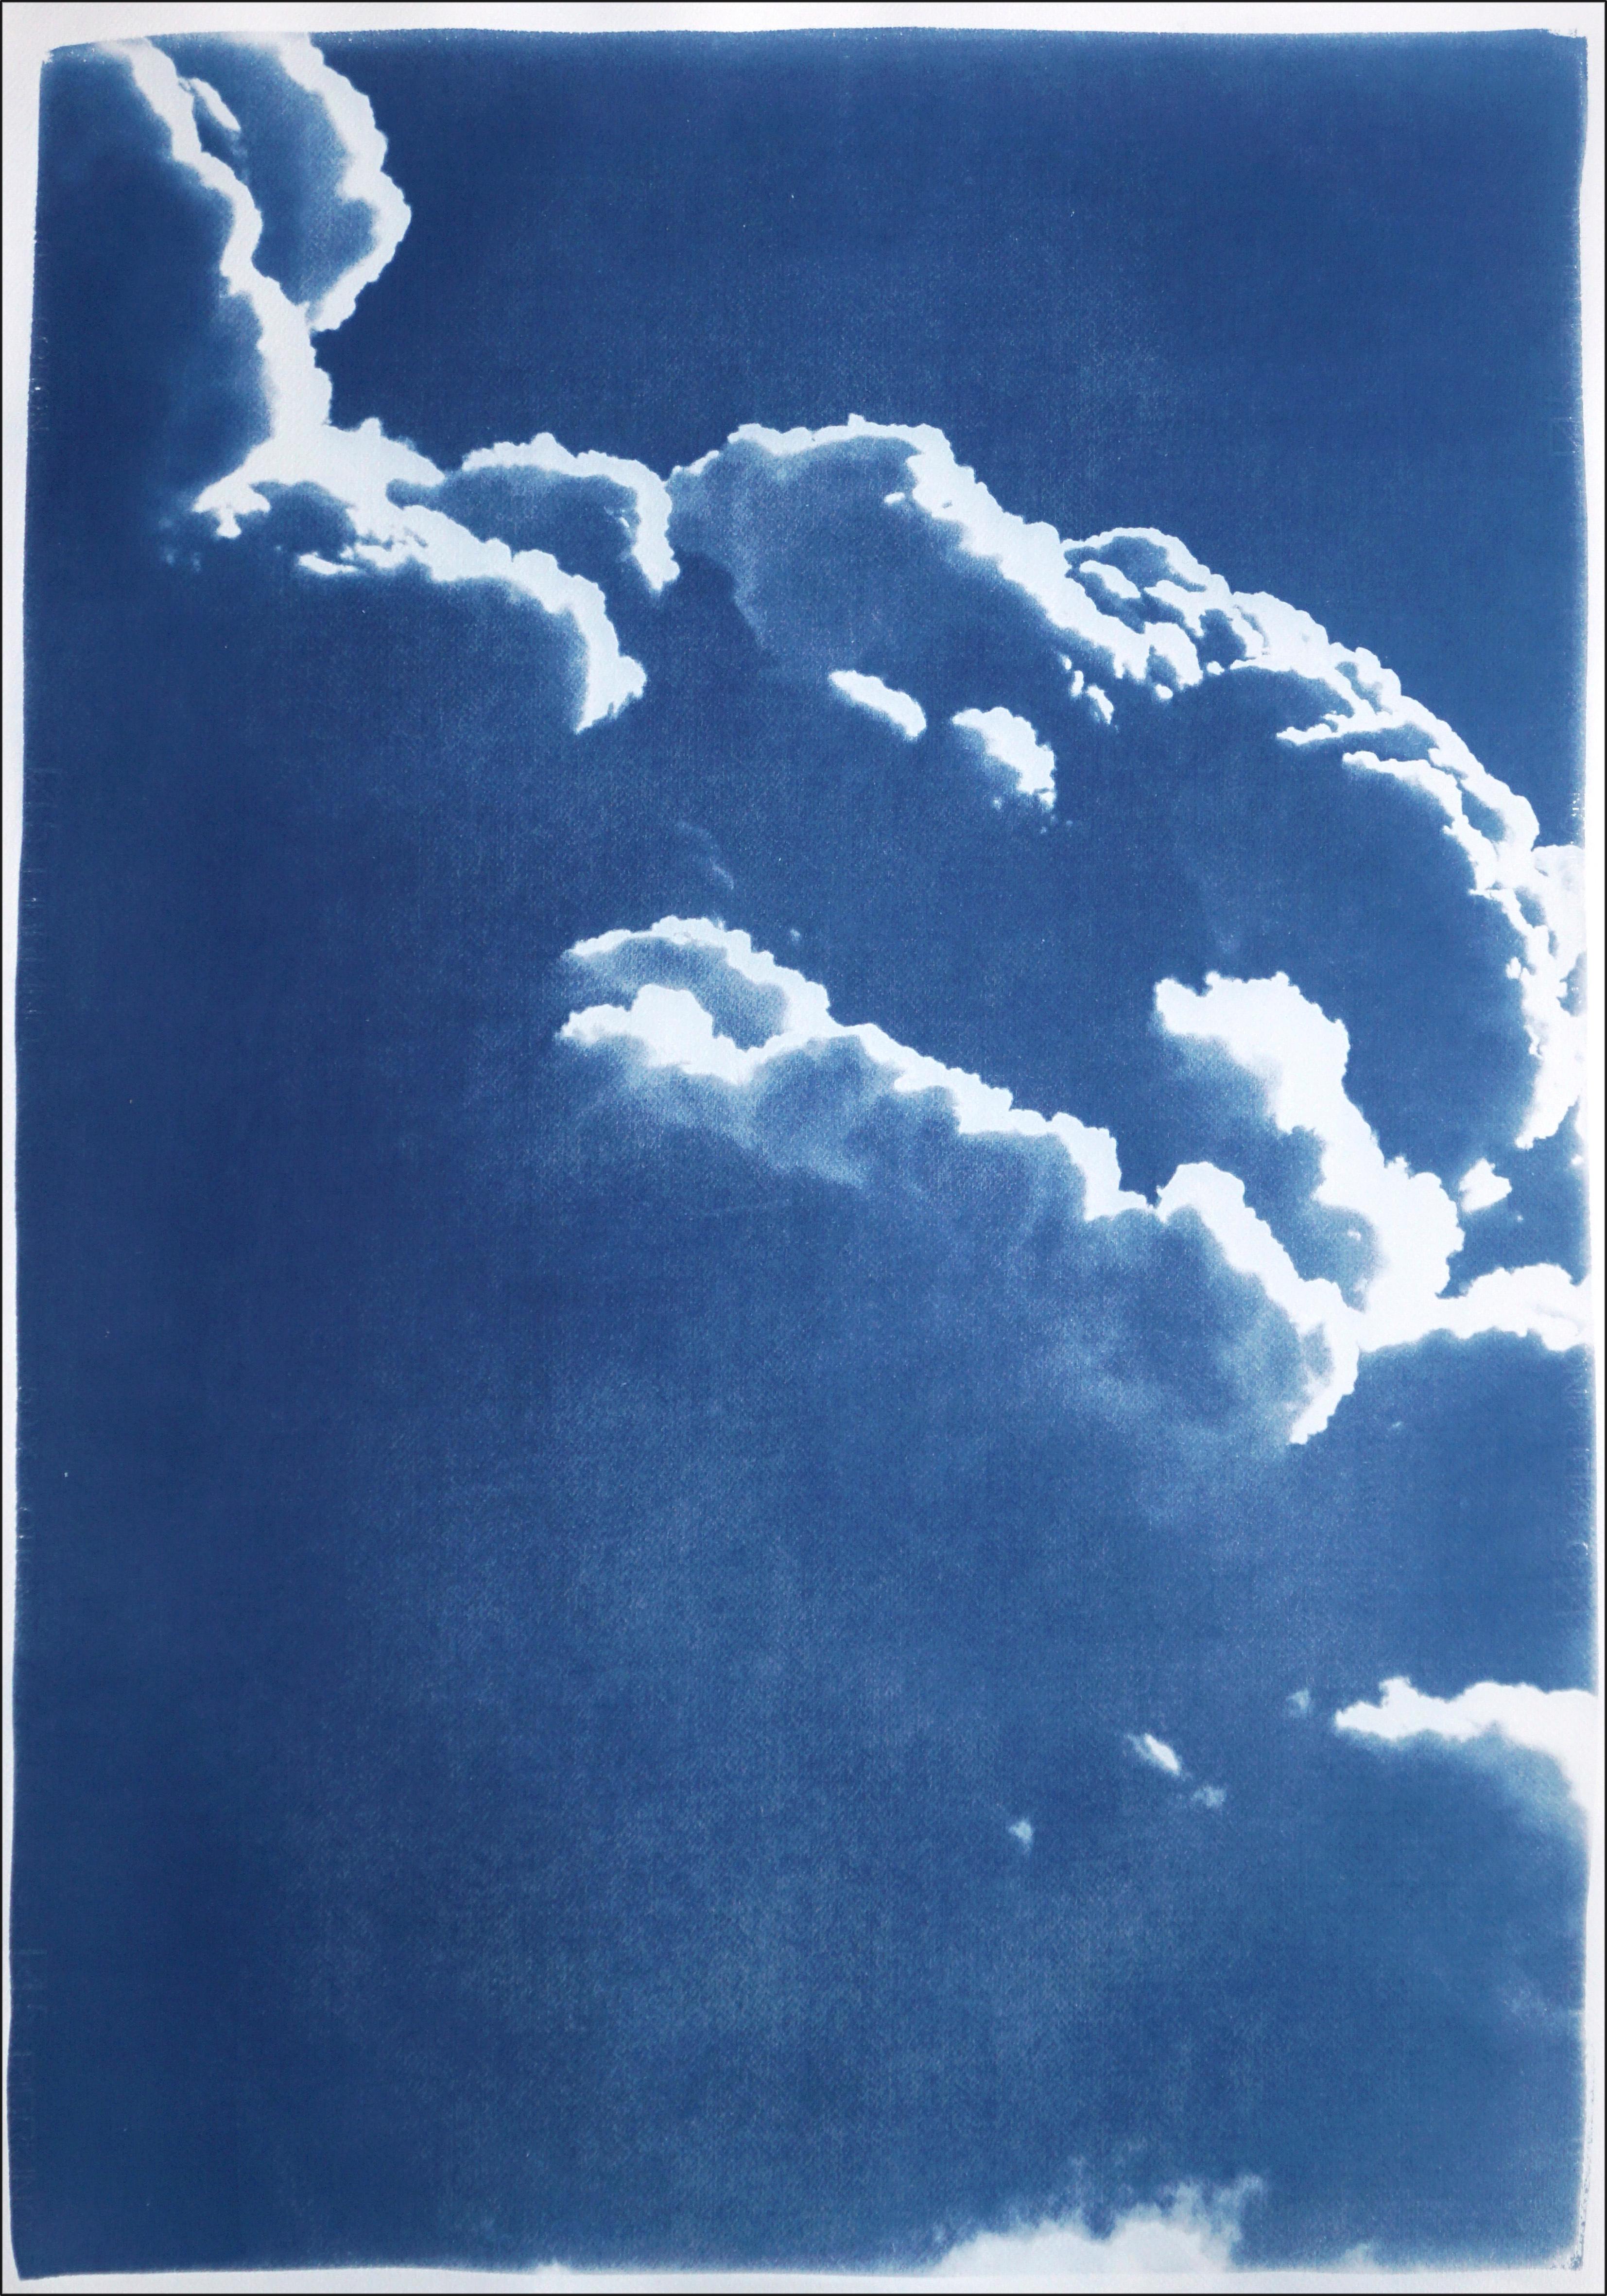 This is an exclusive handprinted limited edition cyanotype diptych of foamy gorgeous clouds.

Details:
+ Title: Floating Clouds Diptych
+ Year: 2023
+ Edition Size: 20
+ Stamped and Certificate of Authenticity provided
+ Measurements : 100x210 cm